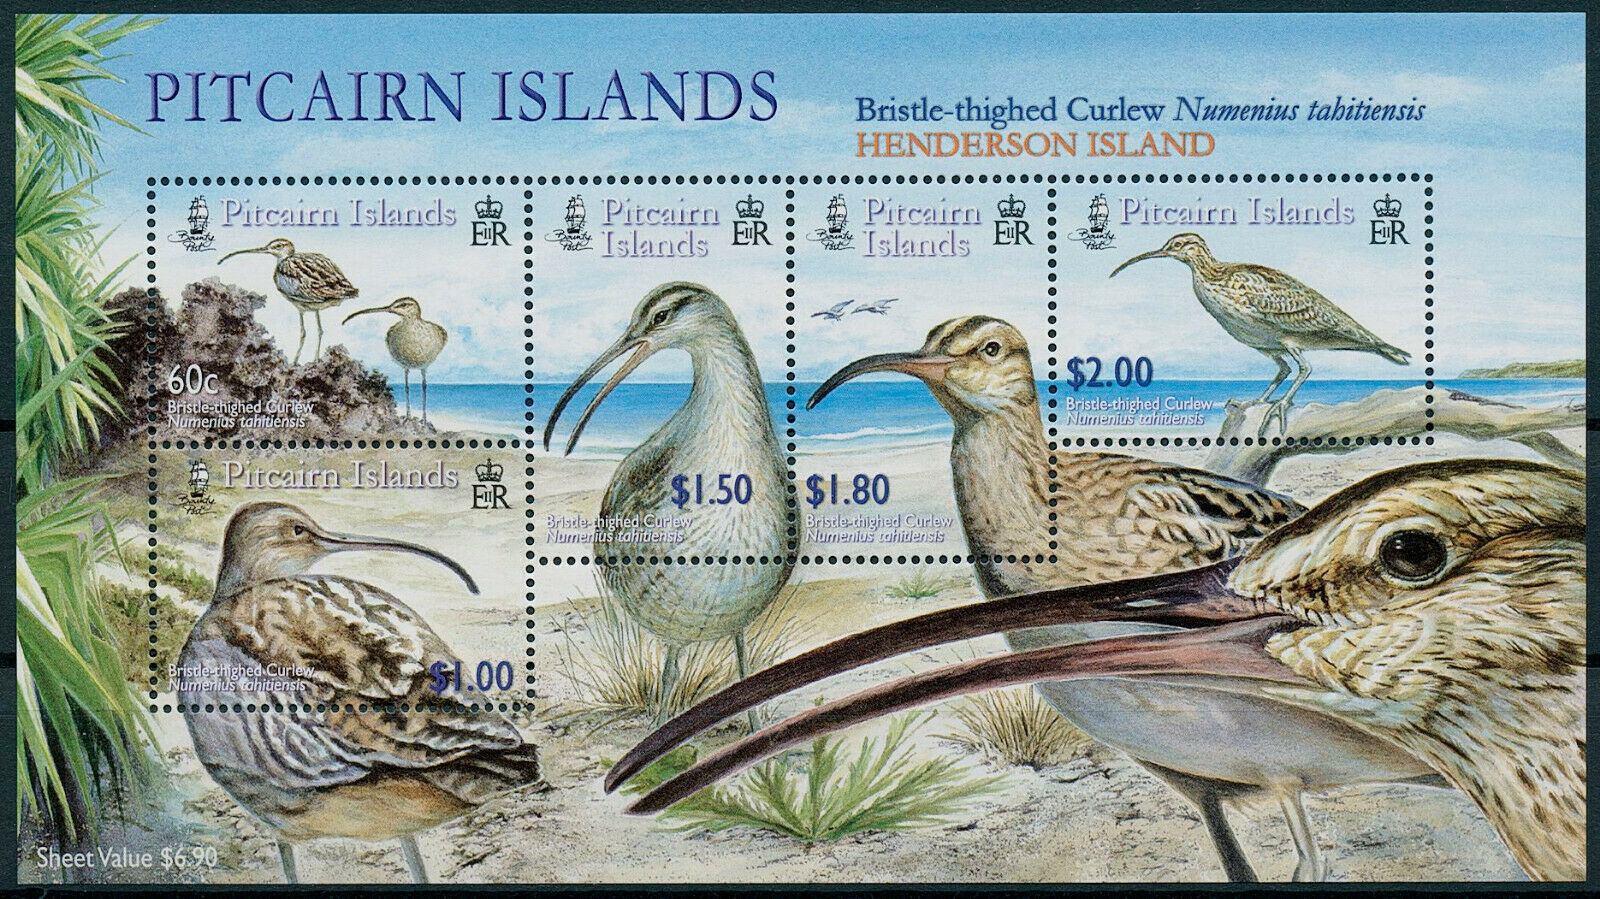 Pitcairn Islands 2005 MNH Birds on Stamps Bristle-thighed Curlews Curlew 5v M/S